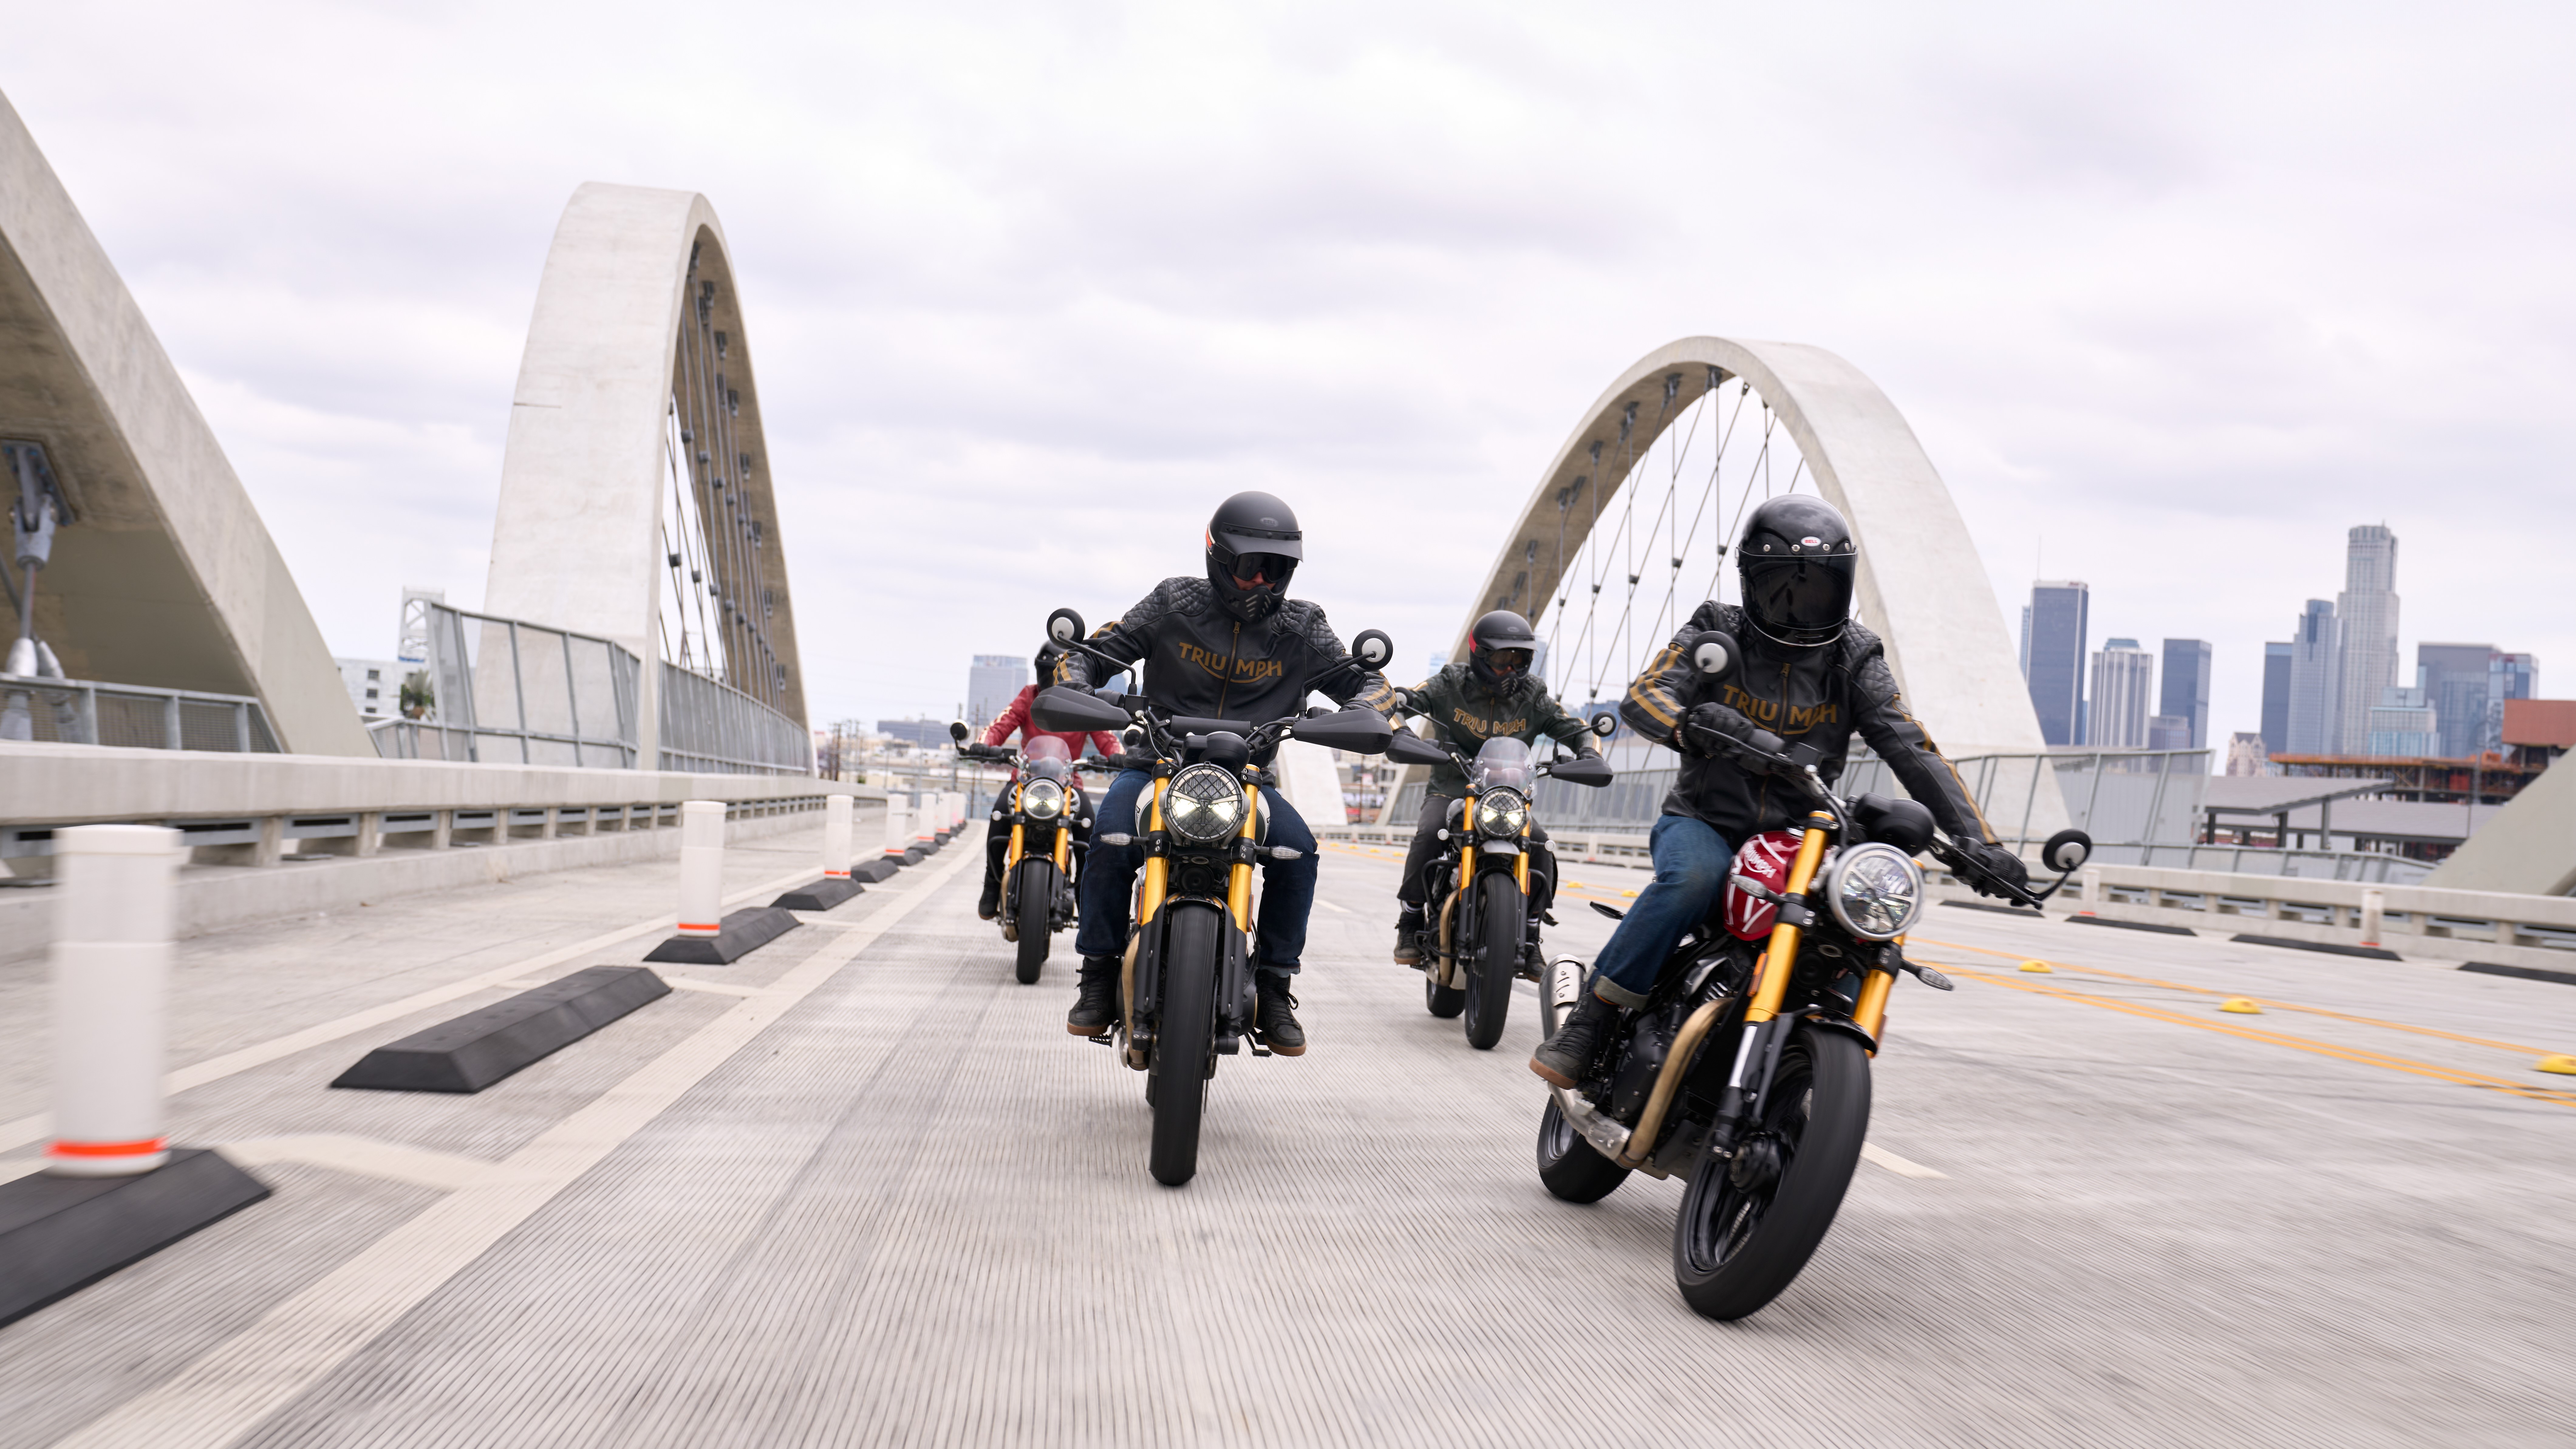 Triumph Speed 400 and Triumph Scrambler 400 X motorcycles riding on a bridge with city skyline in the background - HD Desktop Wallpaper